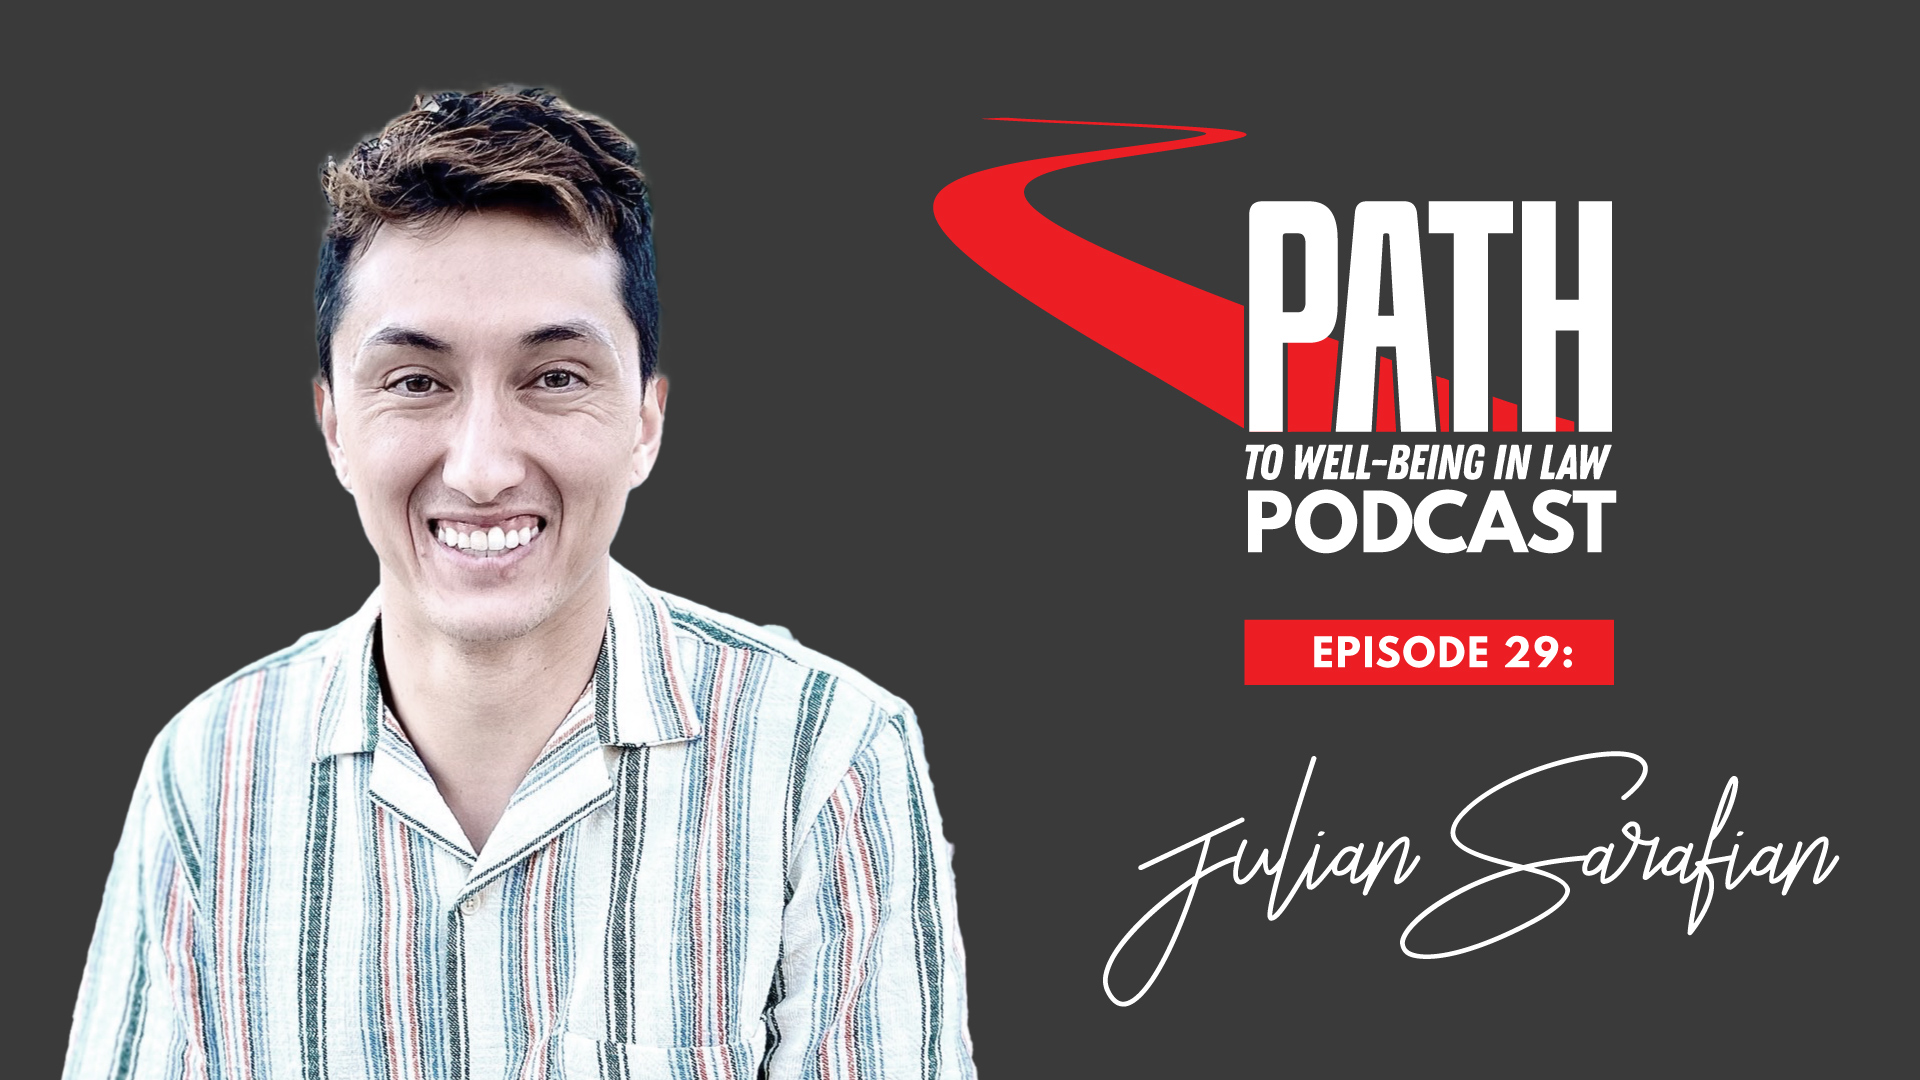 Julian Sarafian photo featured for Episode 29: Path to Well-Being in Law Podcast